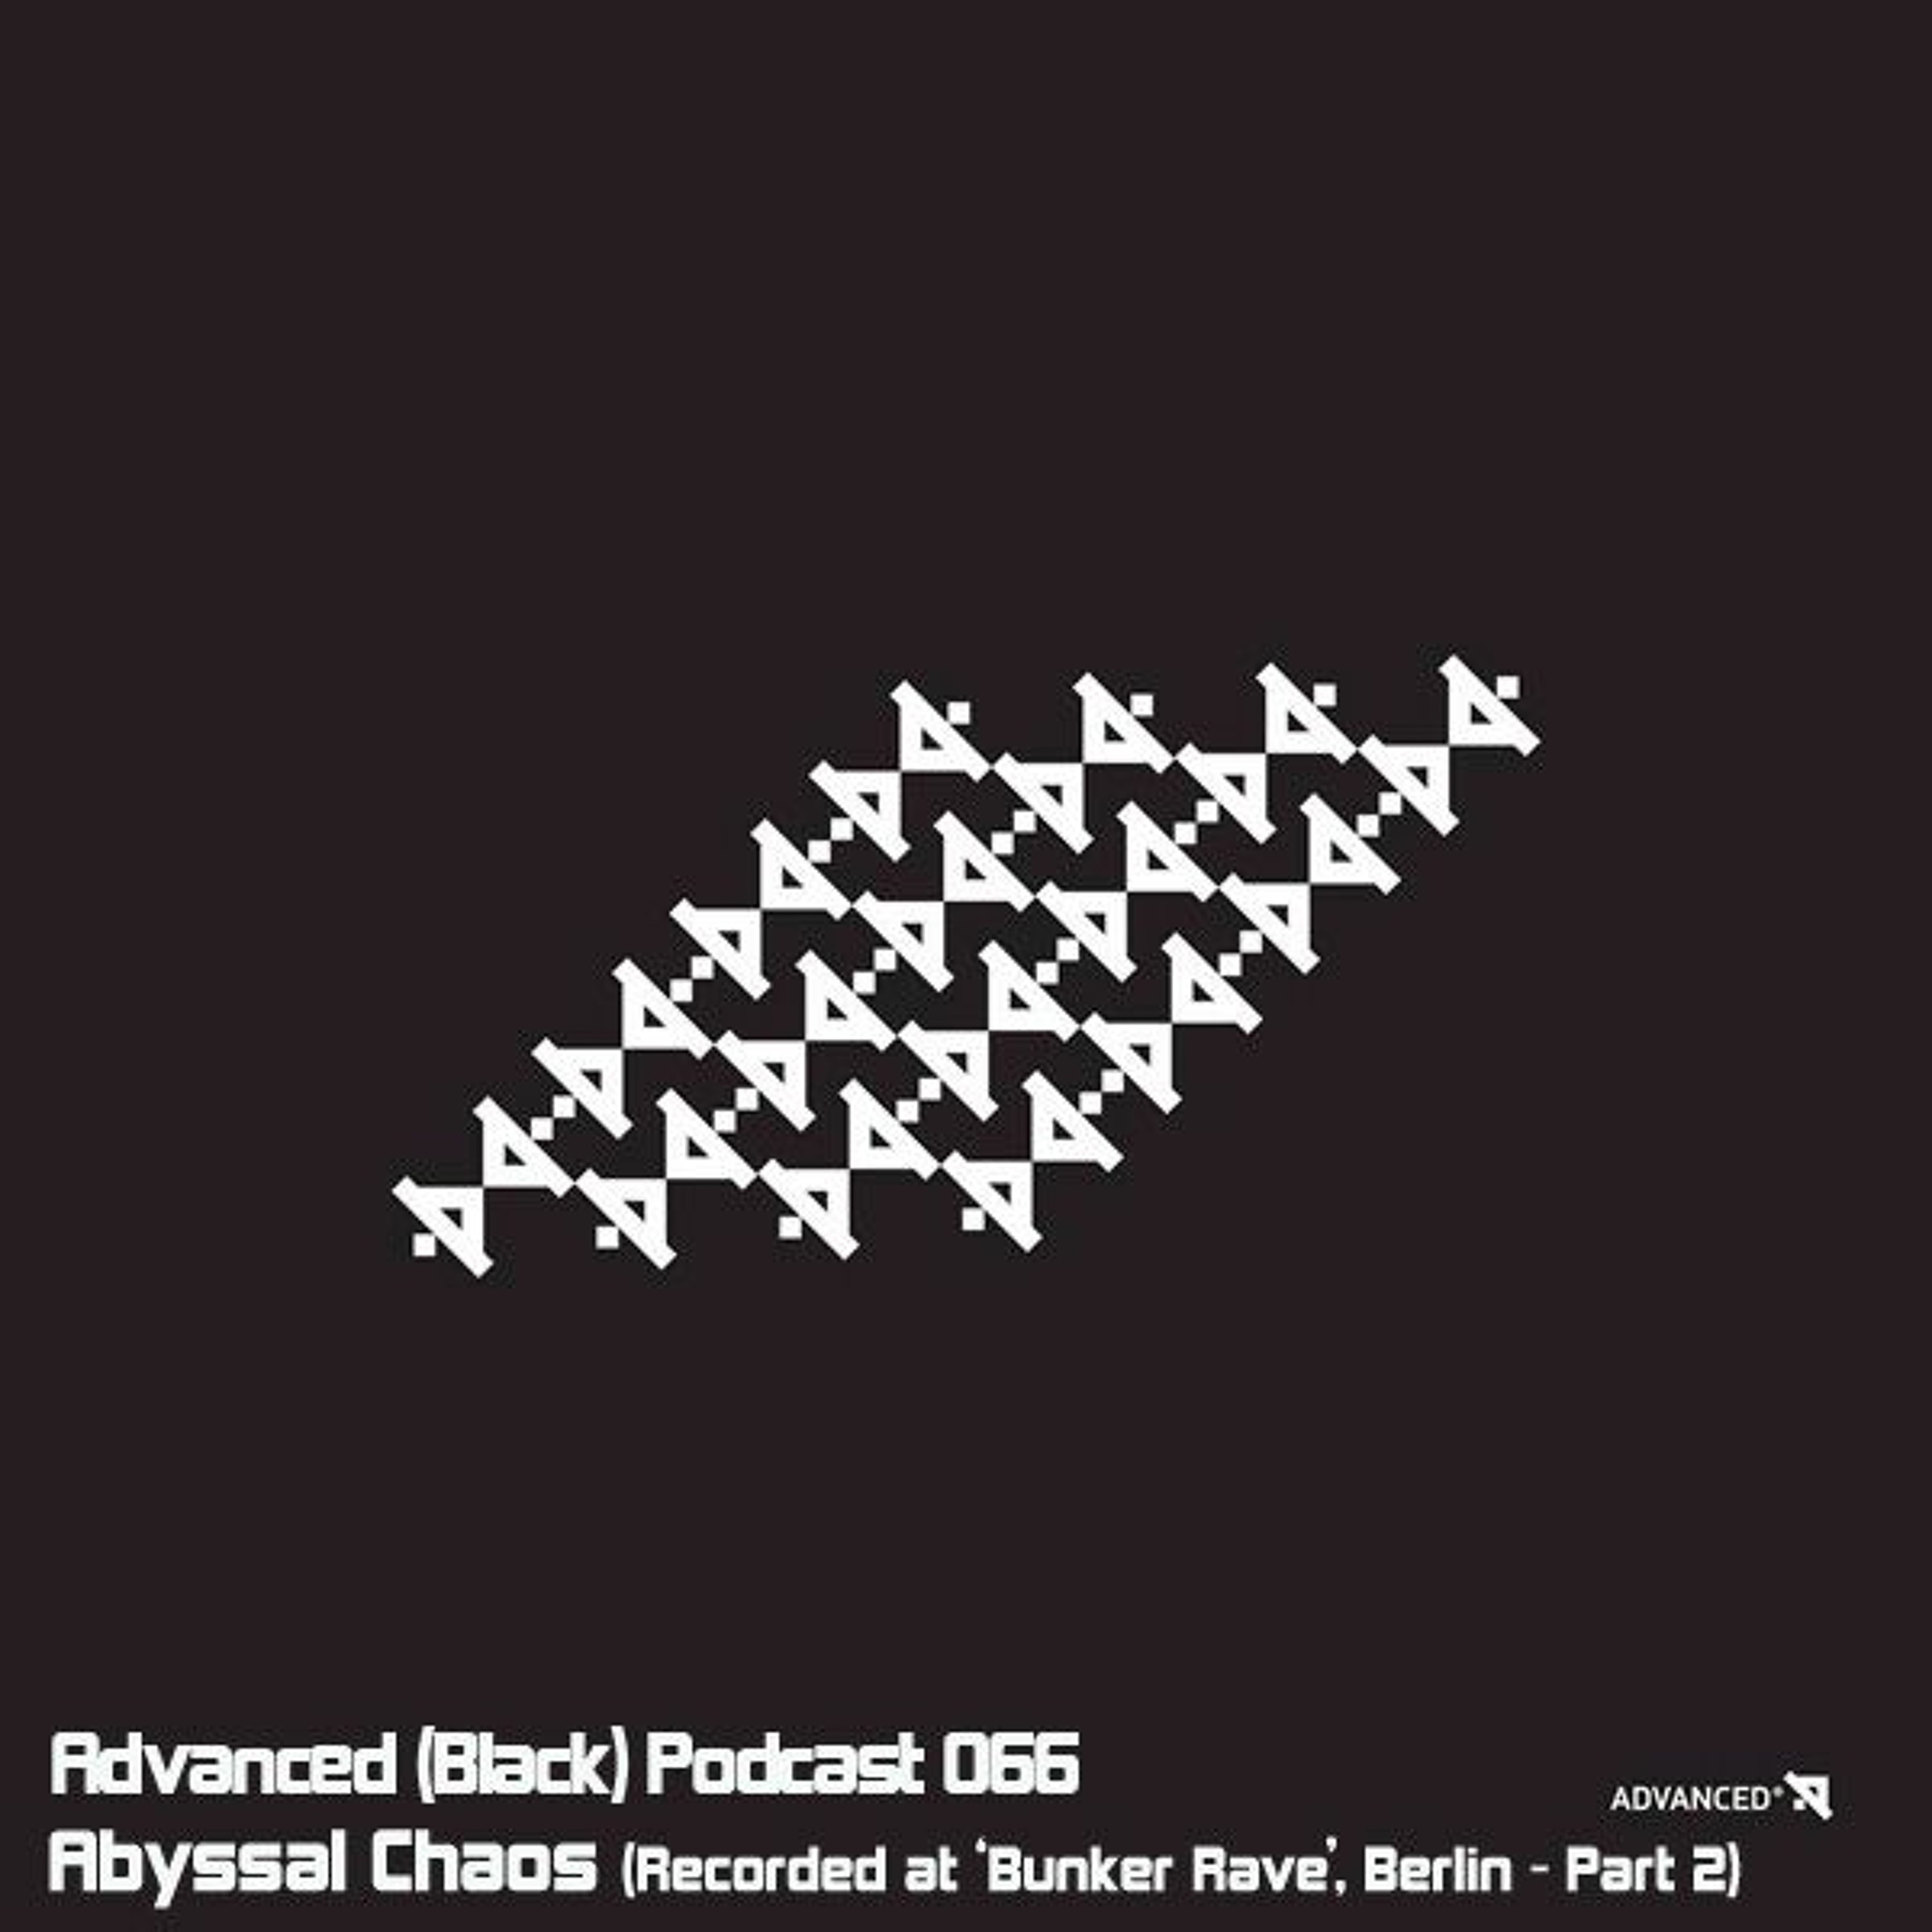 Advanced (Black) Podcast 066 with Abyssal Chaos (Recorded at Bunker Rave, Berlin - 16 HOURS [2/3])